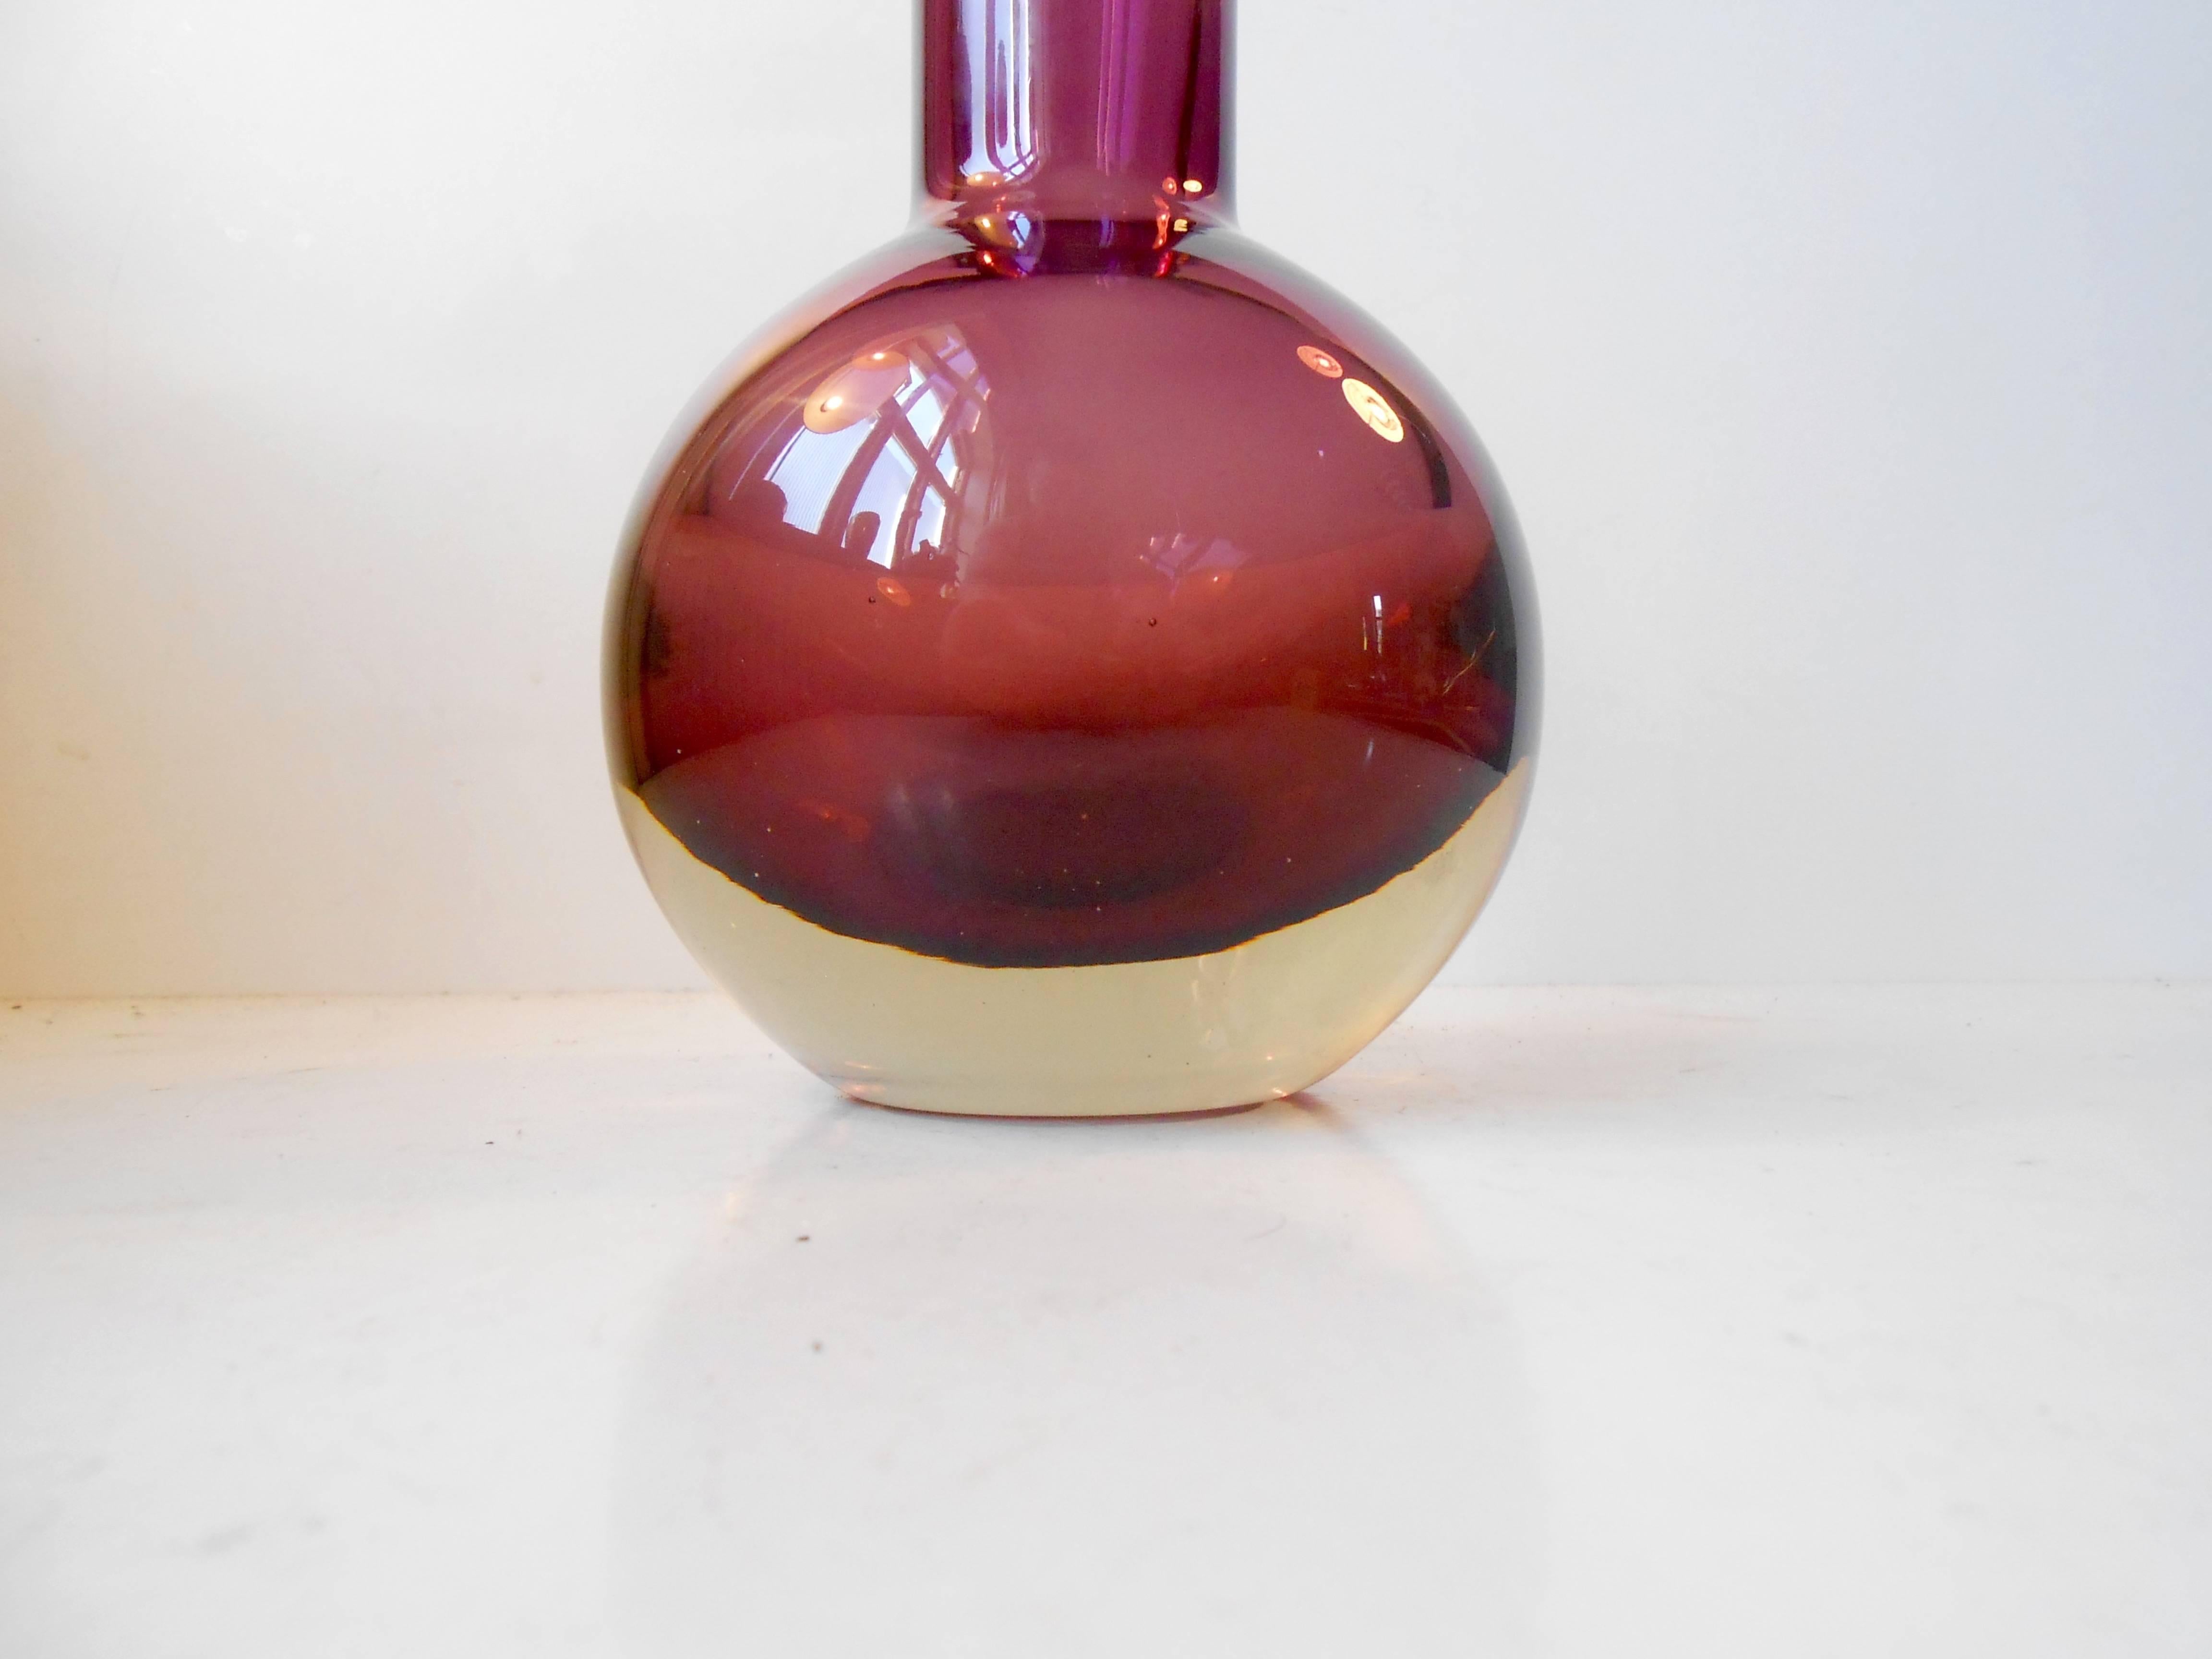 This purple glass vase was designed by Nanny Still and manufactured by Riihimäen Laso Oy in Finland in the 1950s. Mint condition. Signed to the bottom.